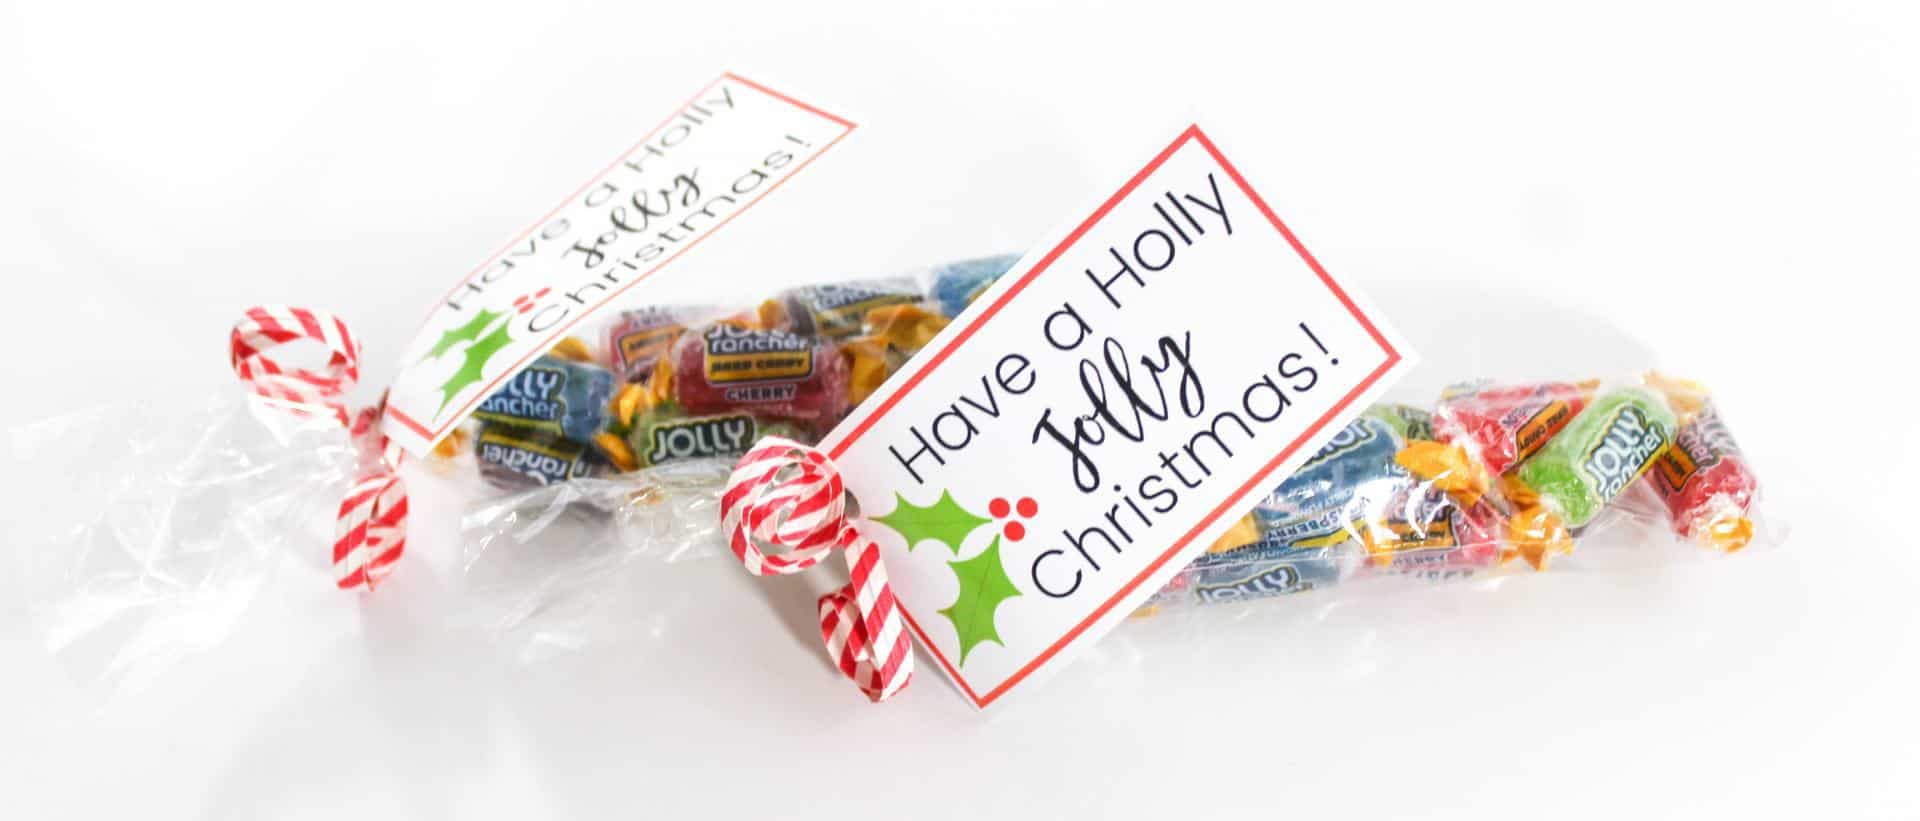 Have a Holly Jolly Christmas gift tag with jolly ranchers in a bag